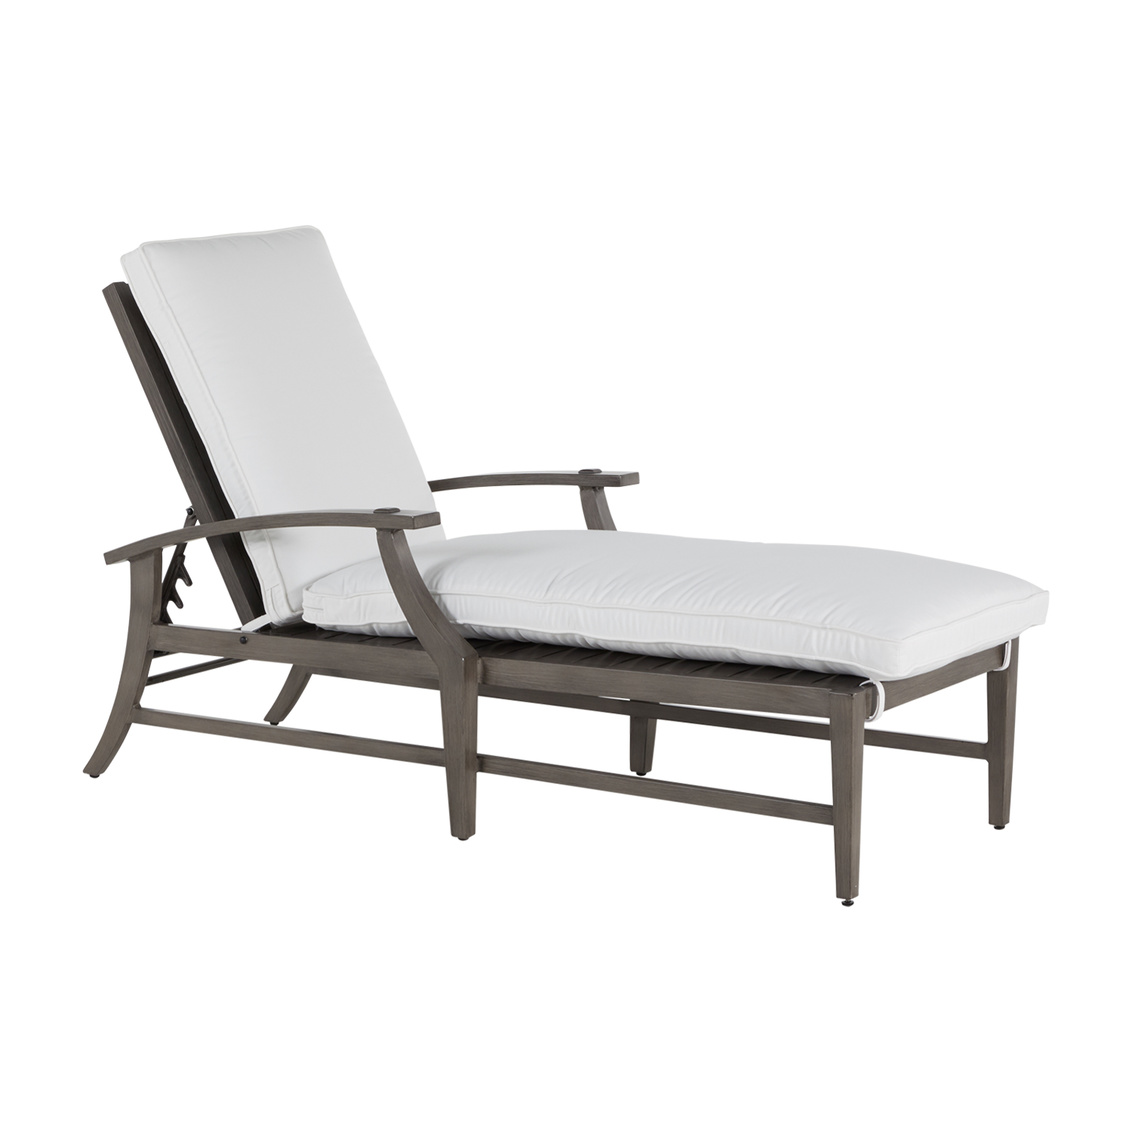 croquet aluminum chaise lounge in slate grey – frame only product image